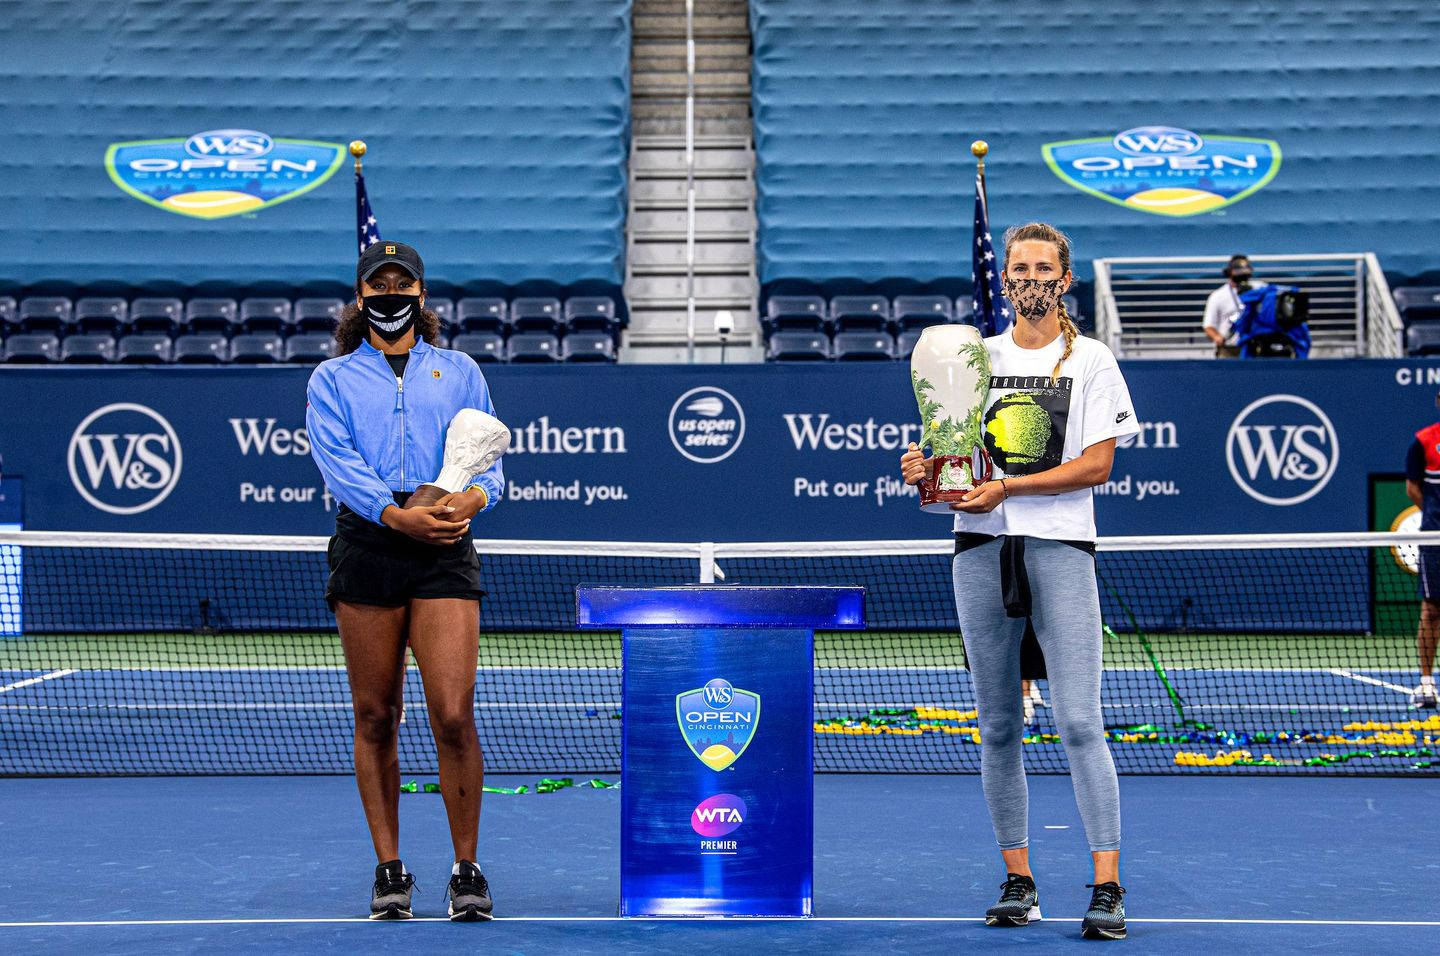 Us Open Players With Trophy Background